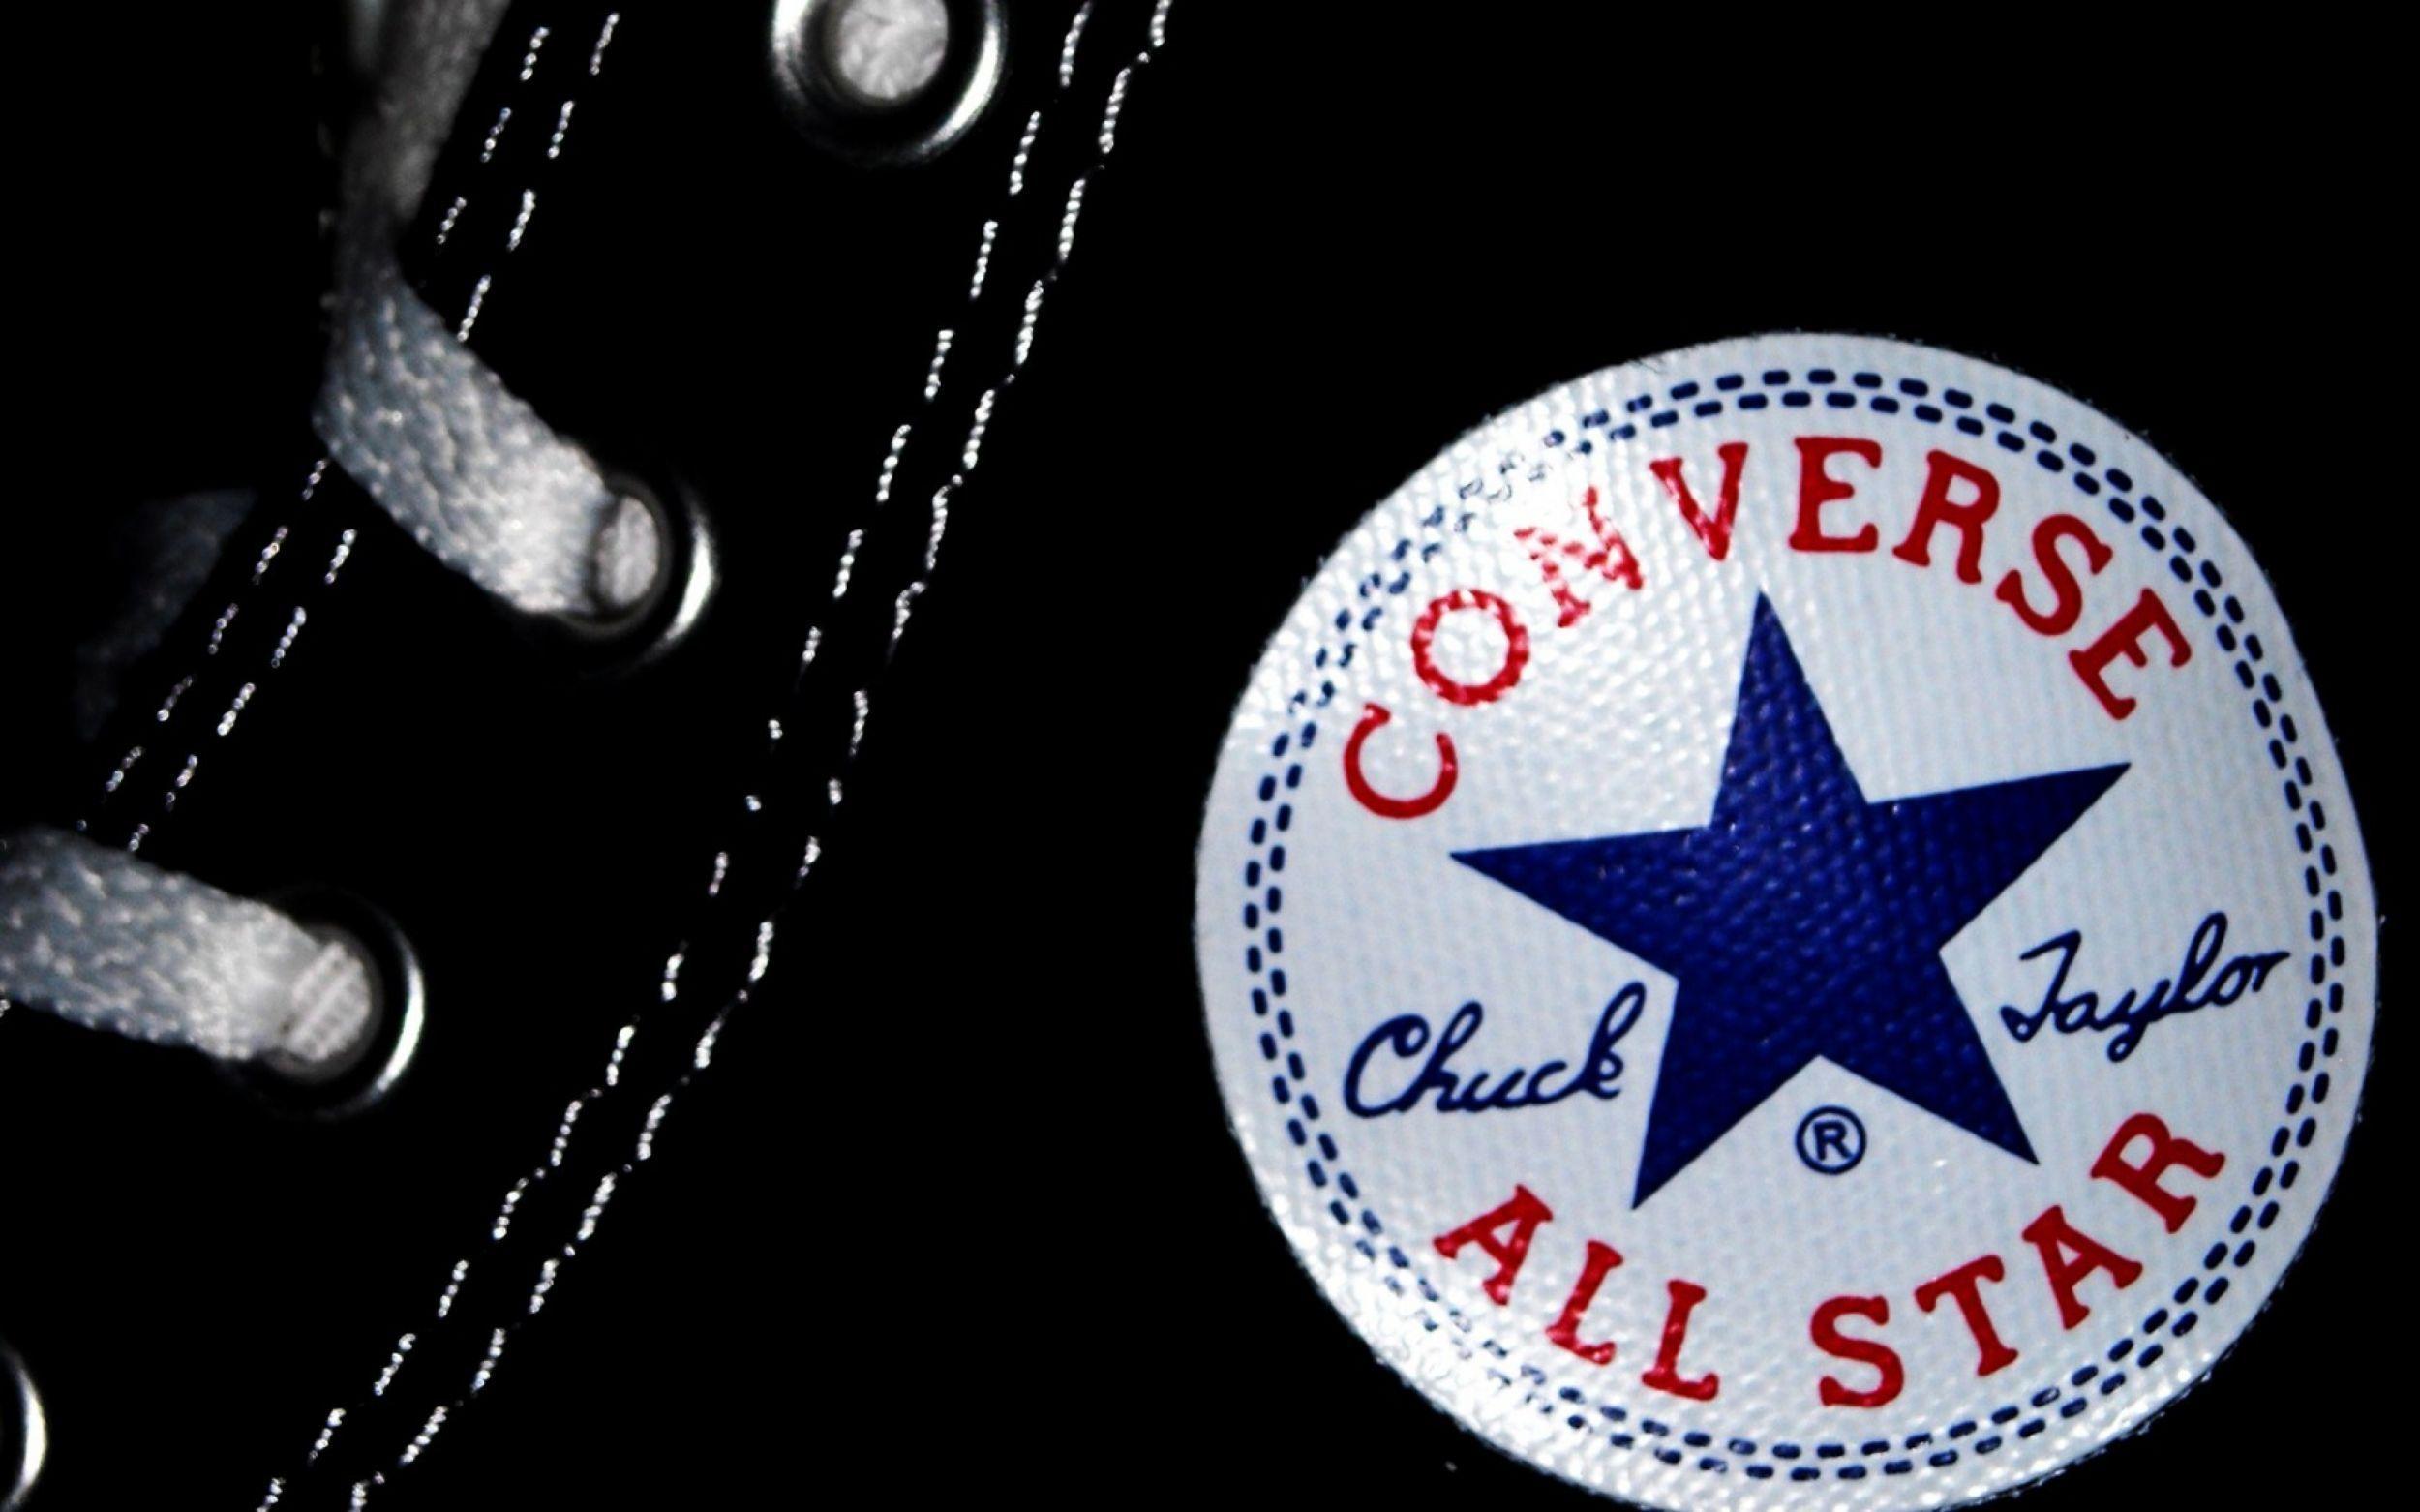 Converse HDQ Image Collection: 3840x2400 px for PC & Mac, Tablet